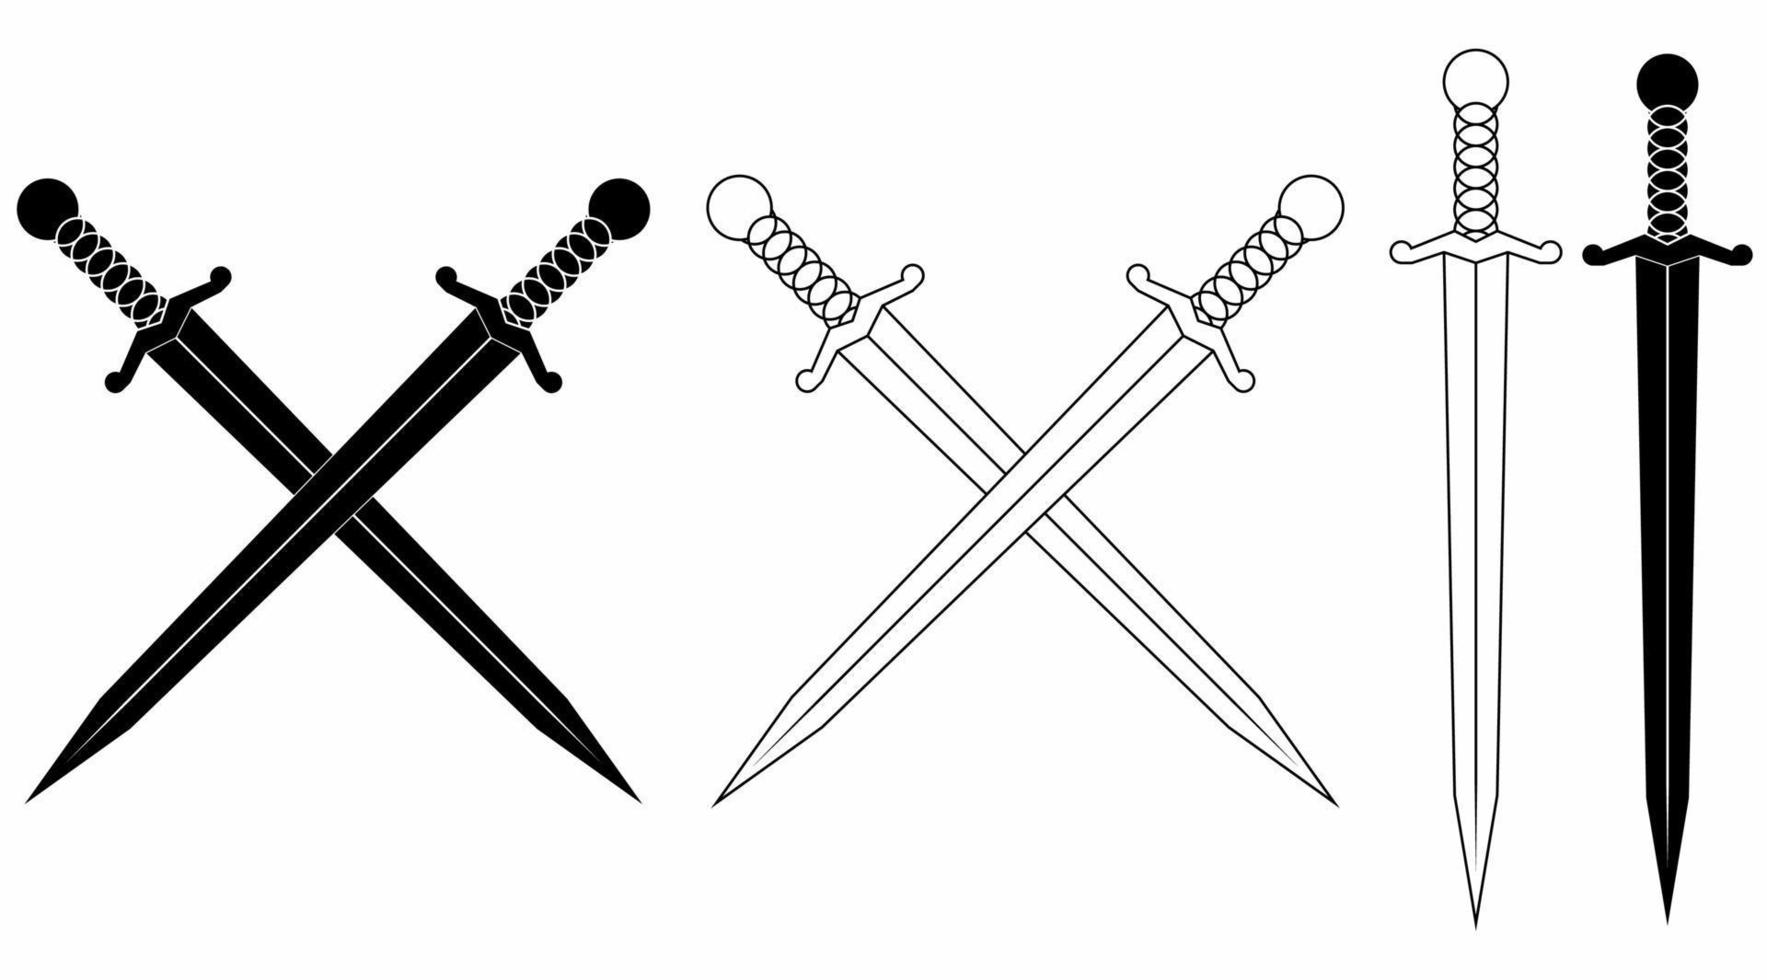 outline silhouette cross sword icon set isolated on white background vector